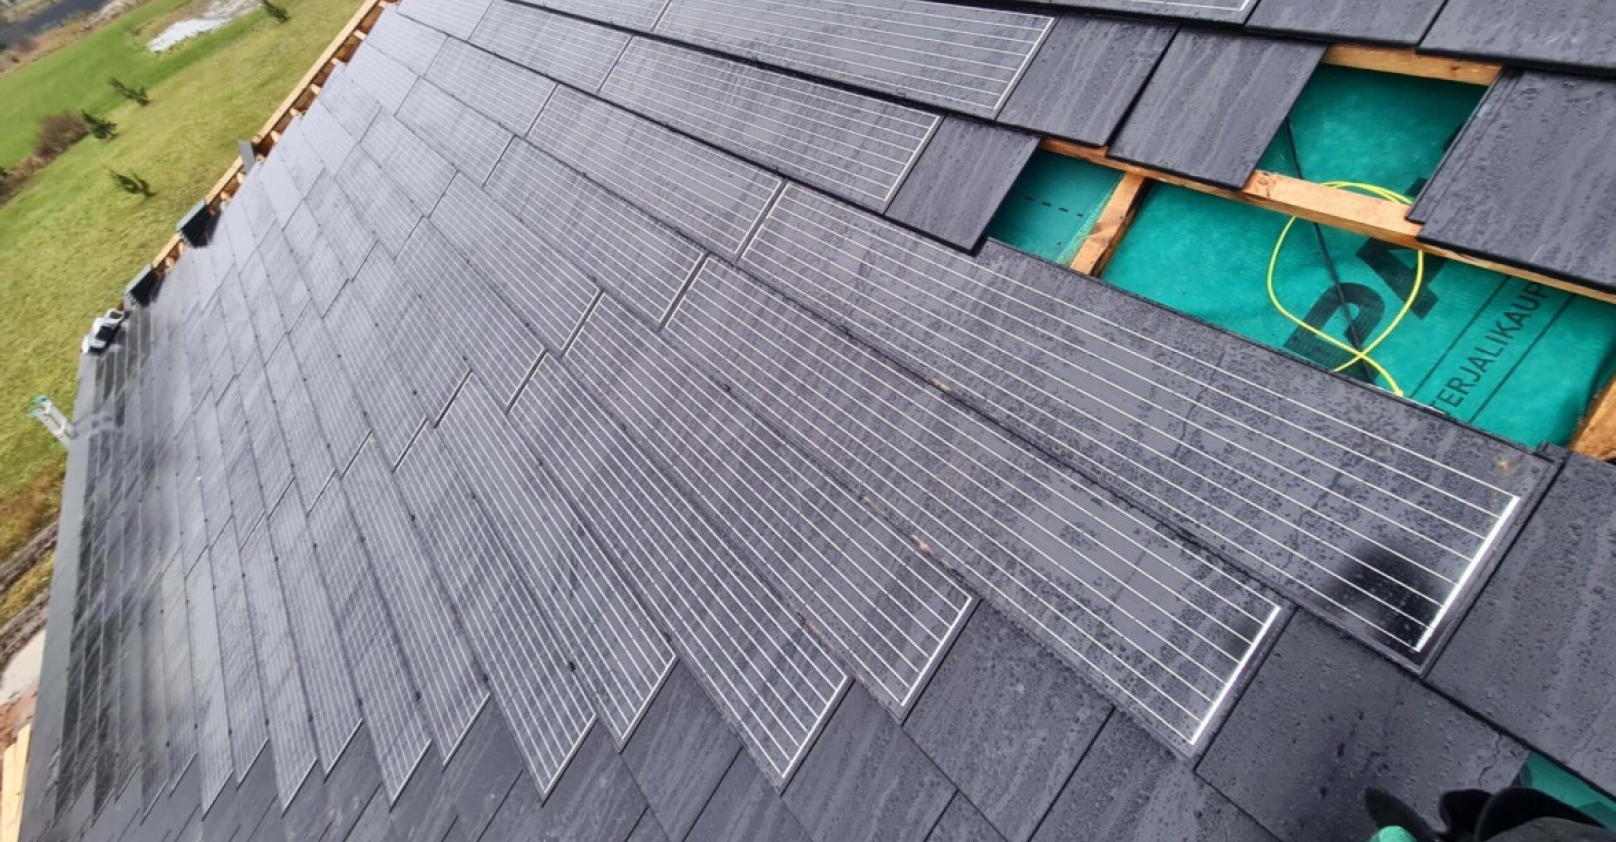 an image of solarstone solar tiled roof with roof tiles